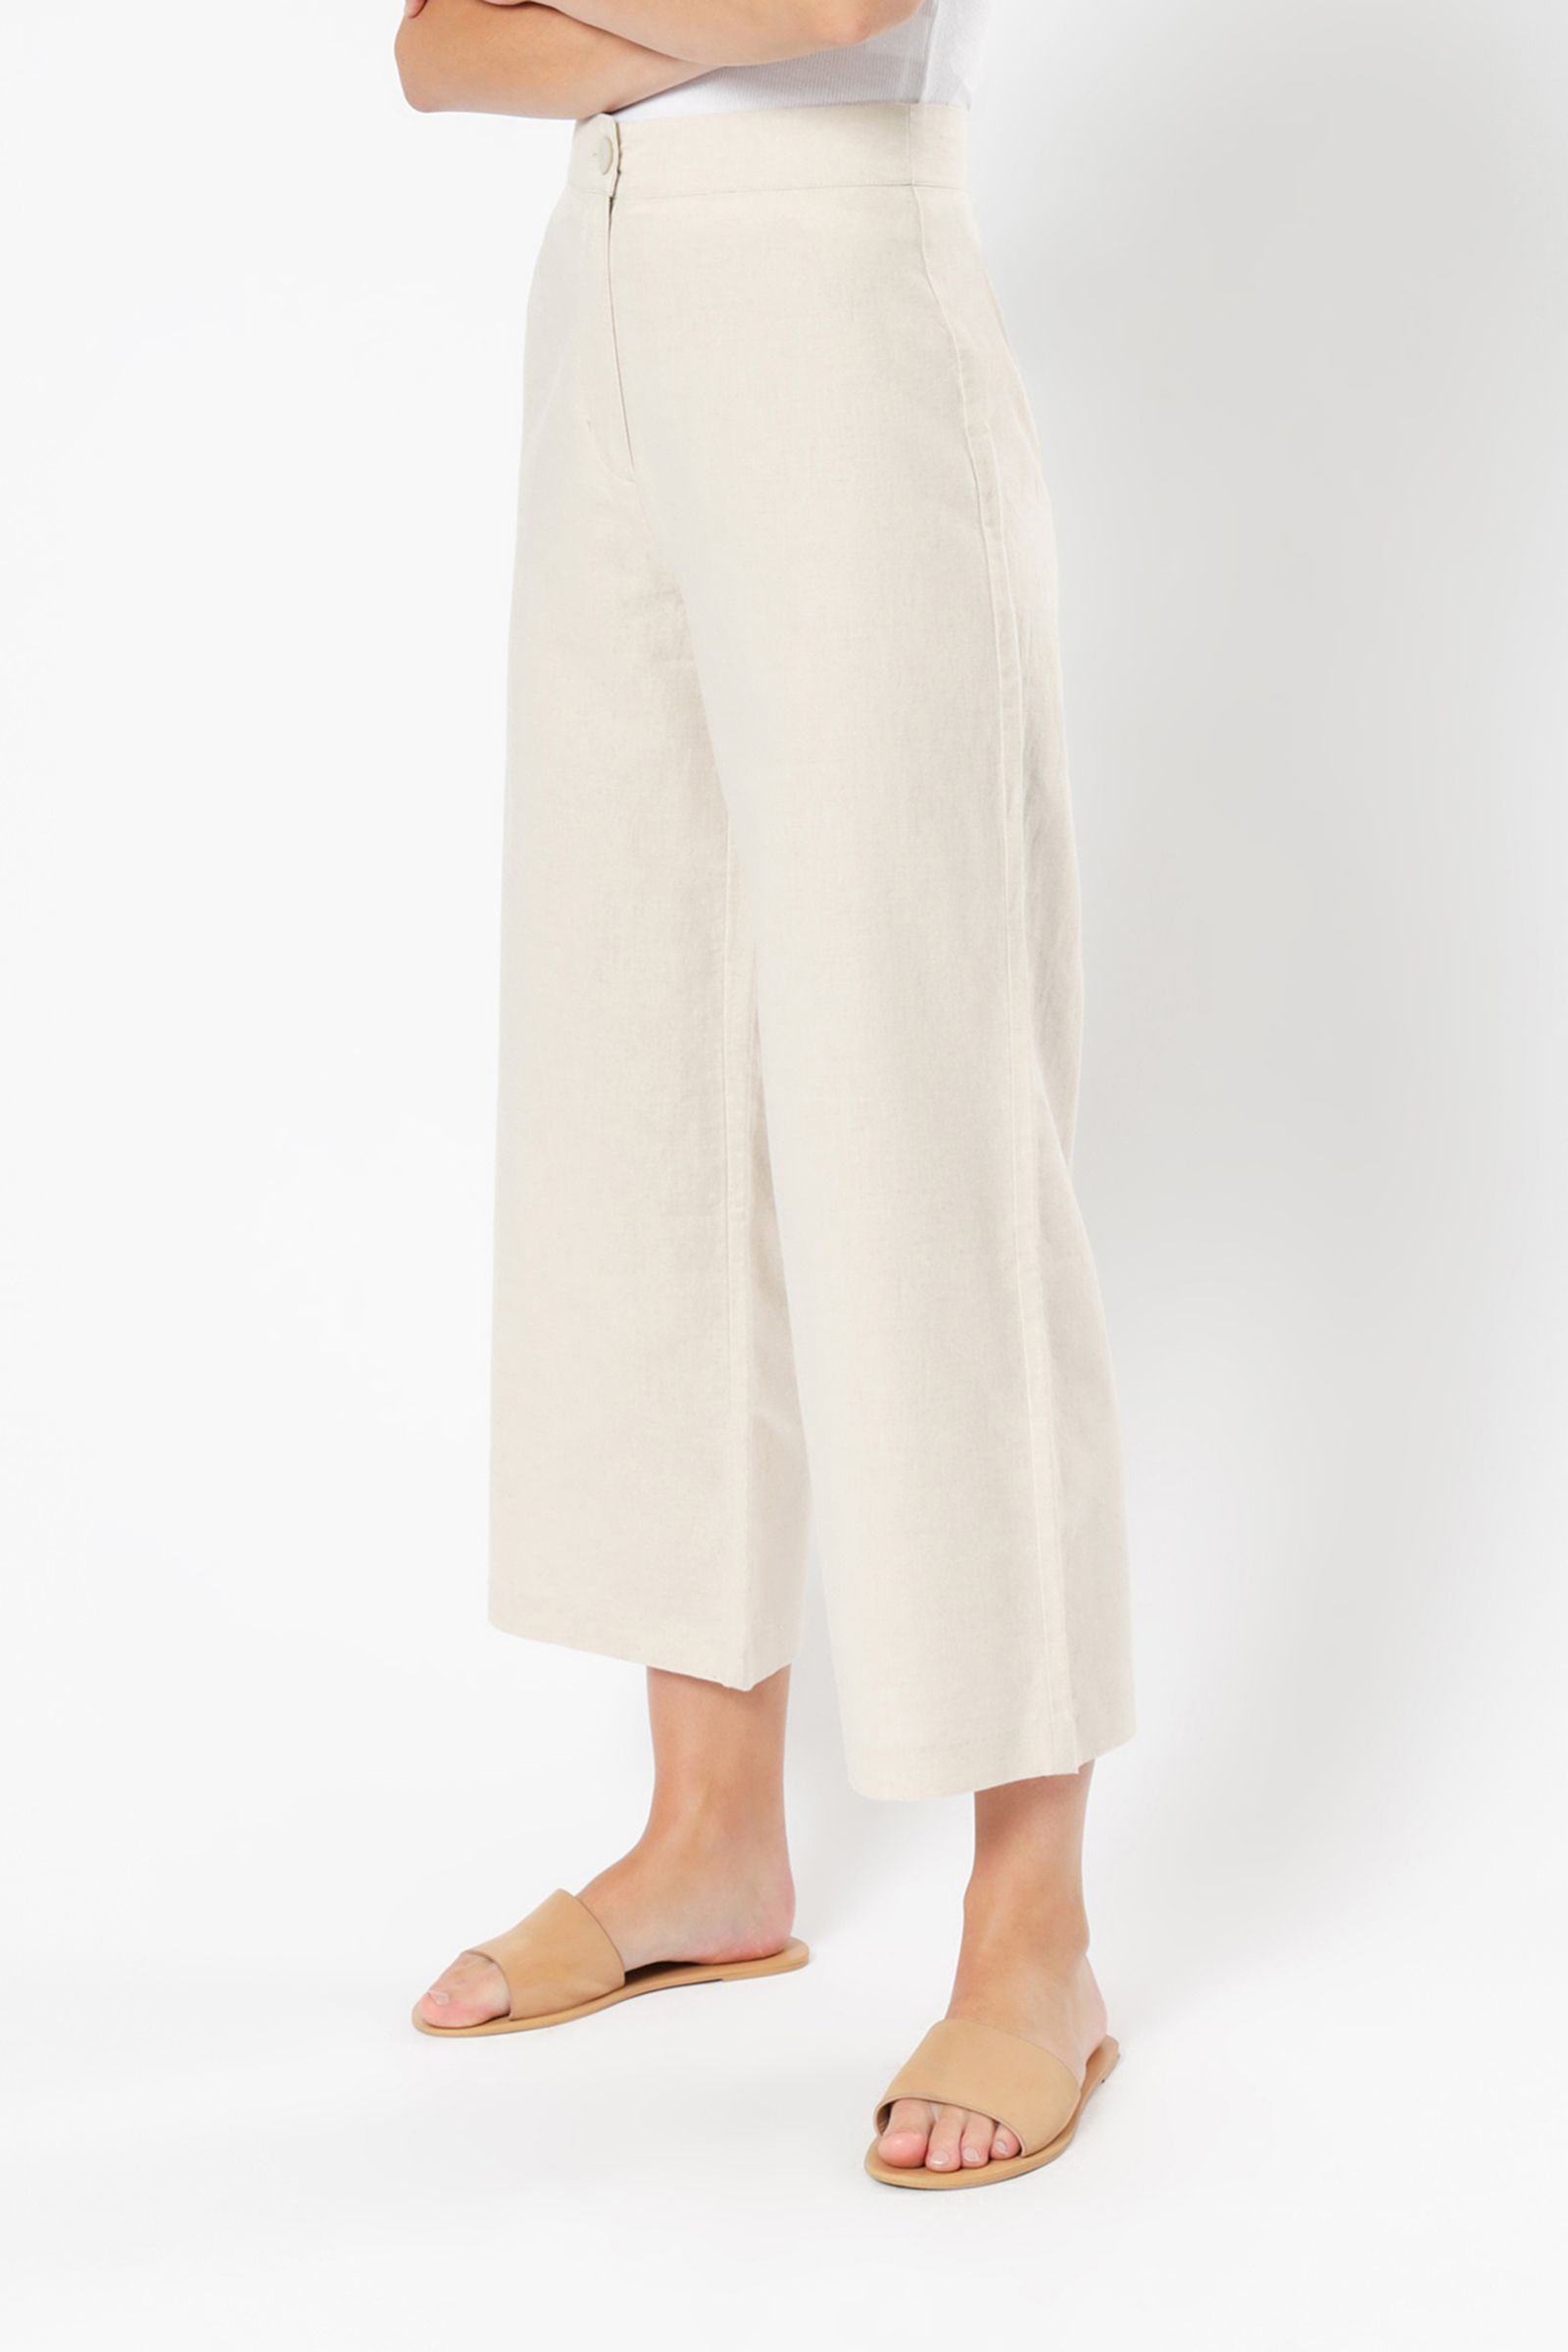 Nude Lucy drew pant oat pants